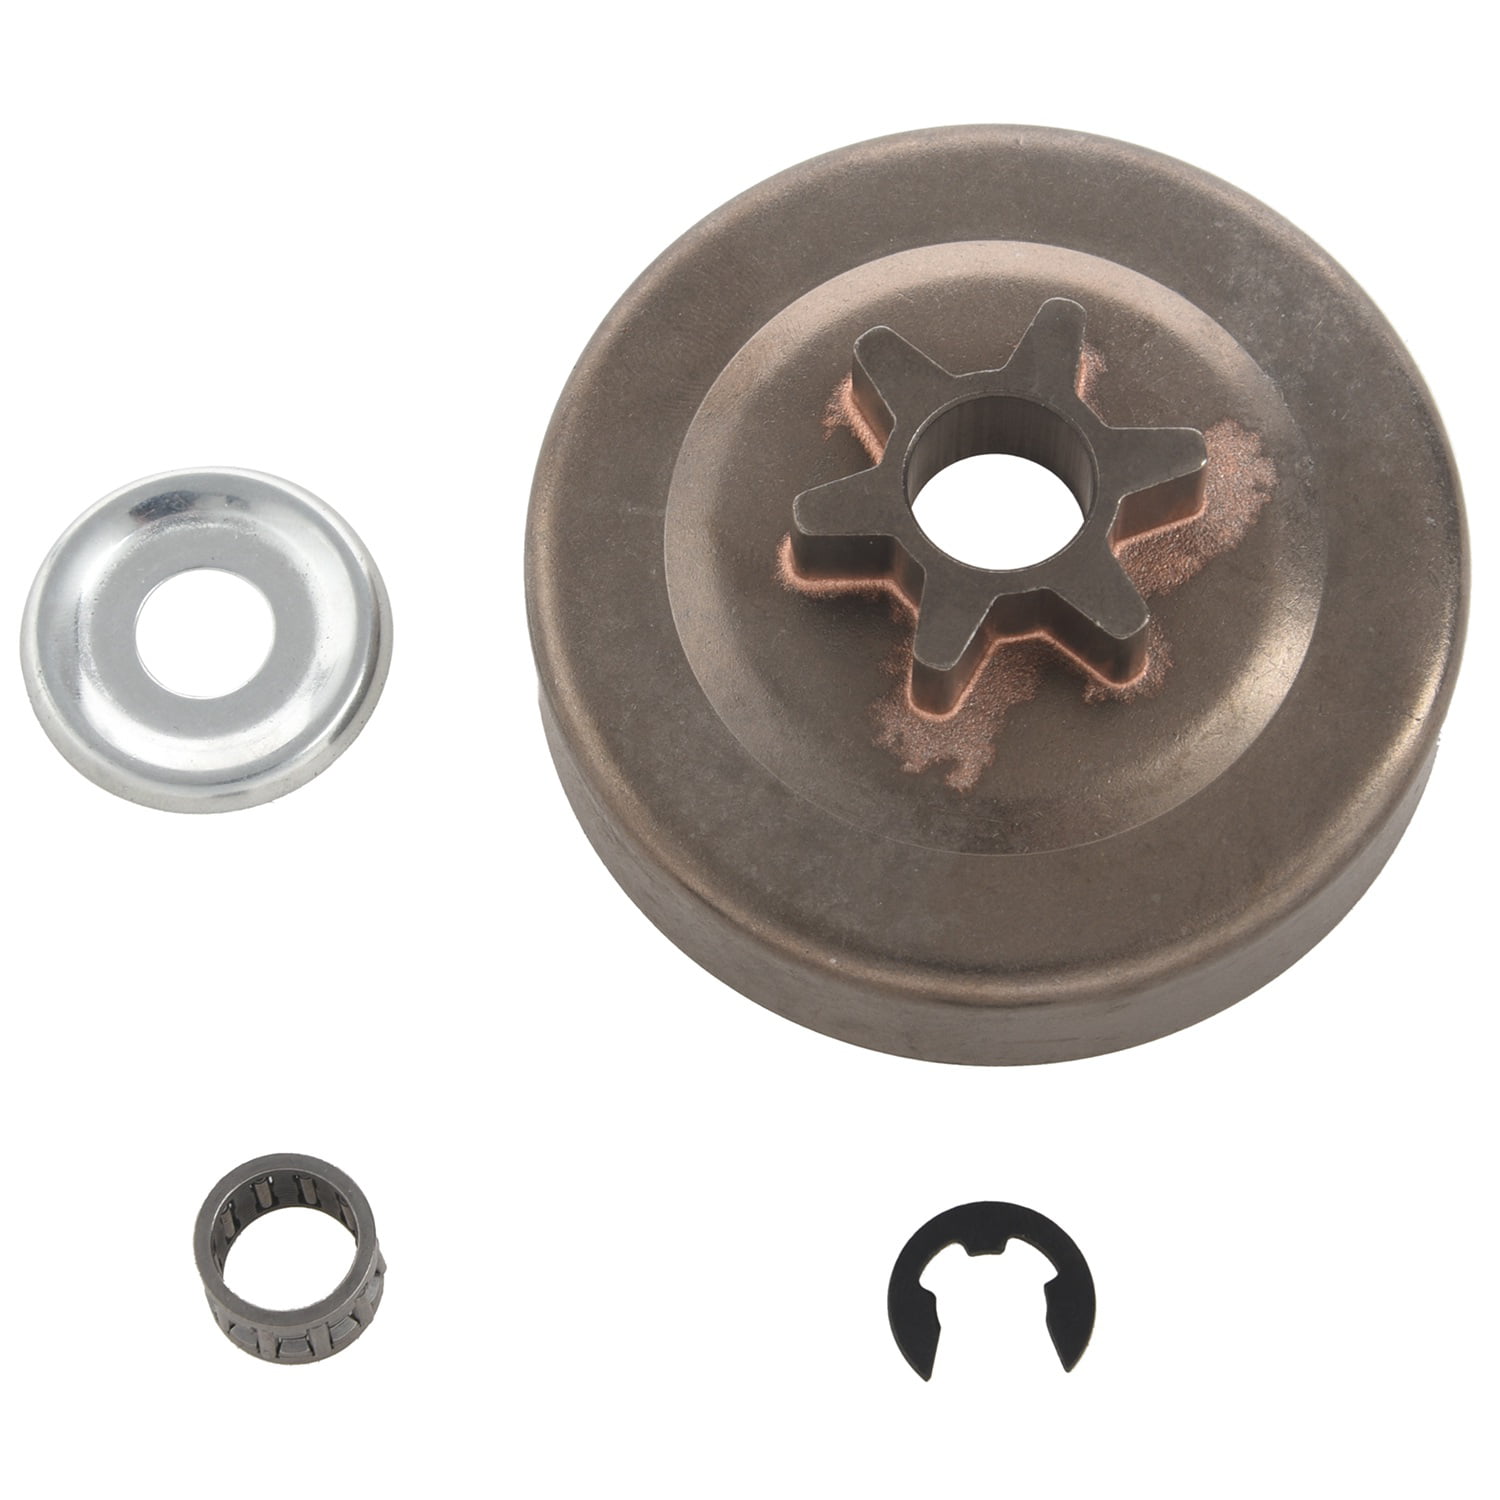 NEW Clutch Washer Clip Bearing Kit for Stihl MS180 MS170 MS210 MS230 MS250